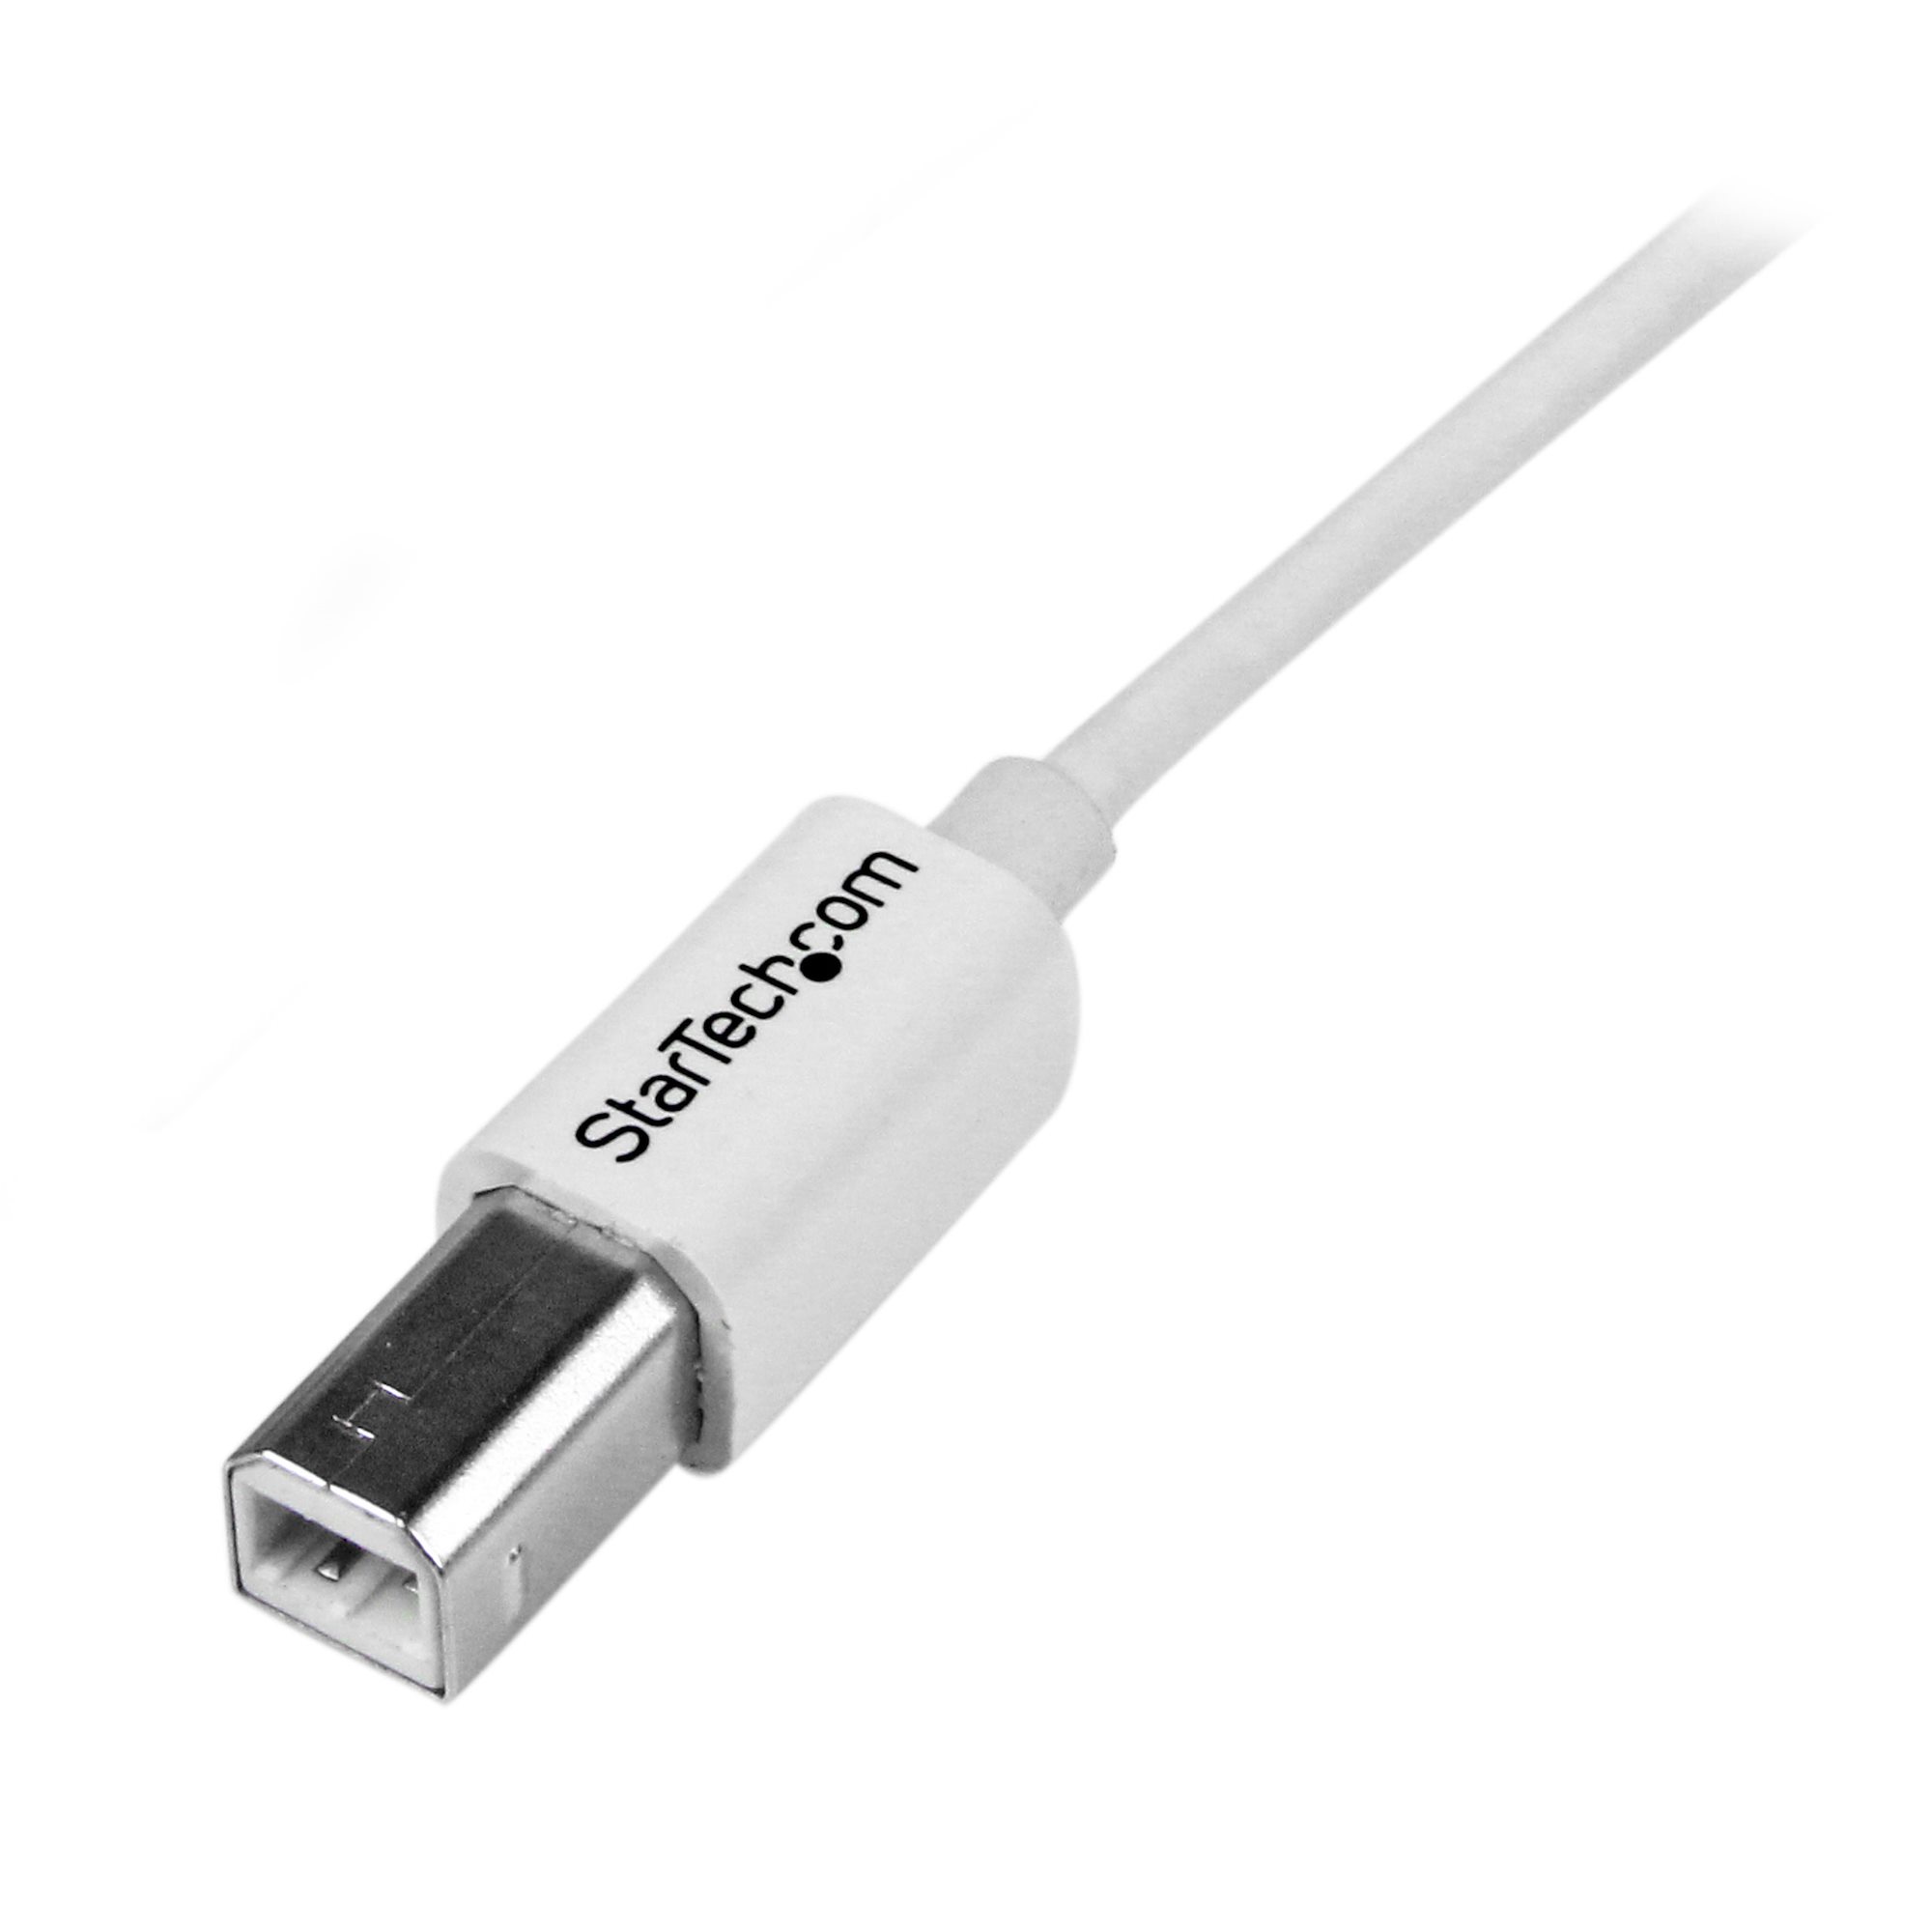 6.6ft (2m) USB 2.0 A/B Cable - White, USB 2.0 Cables